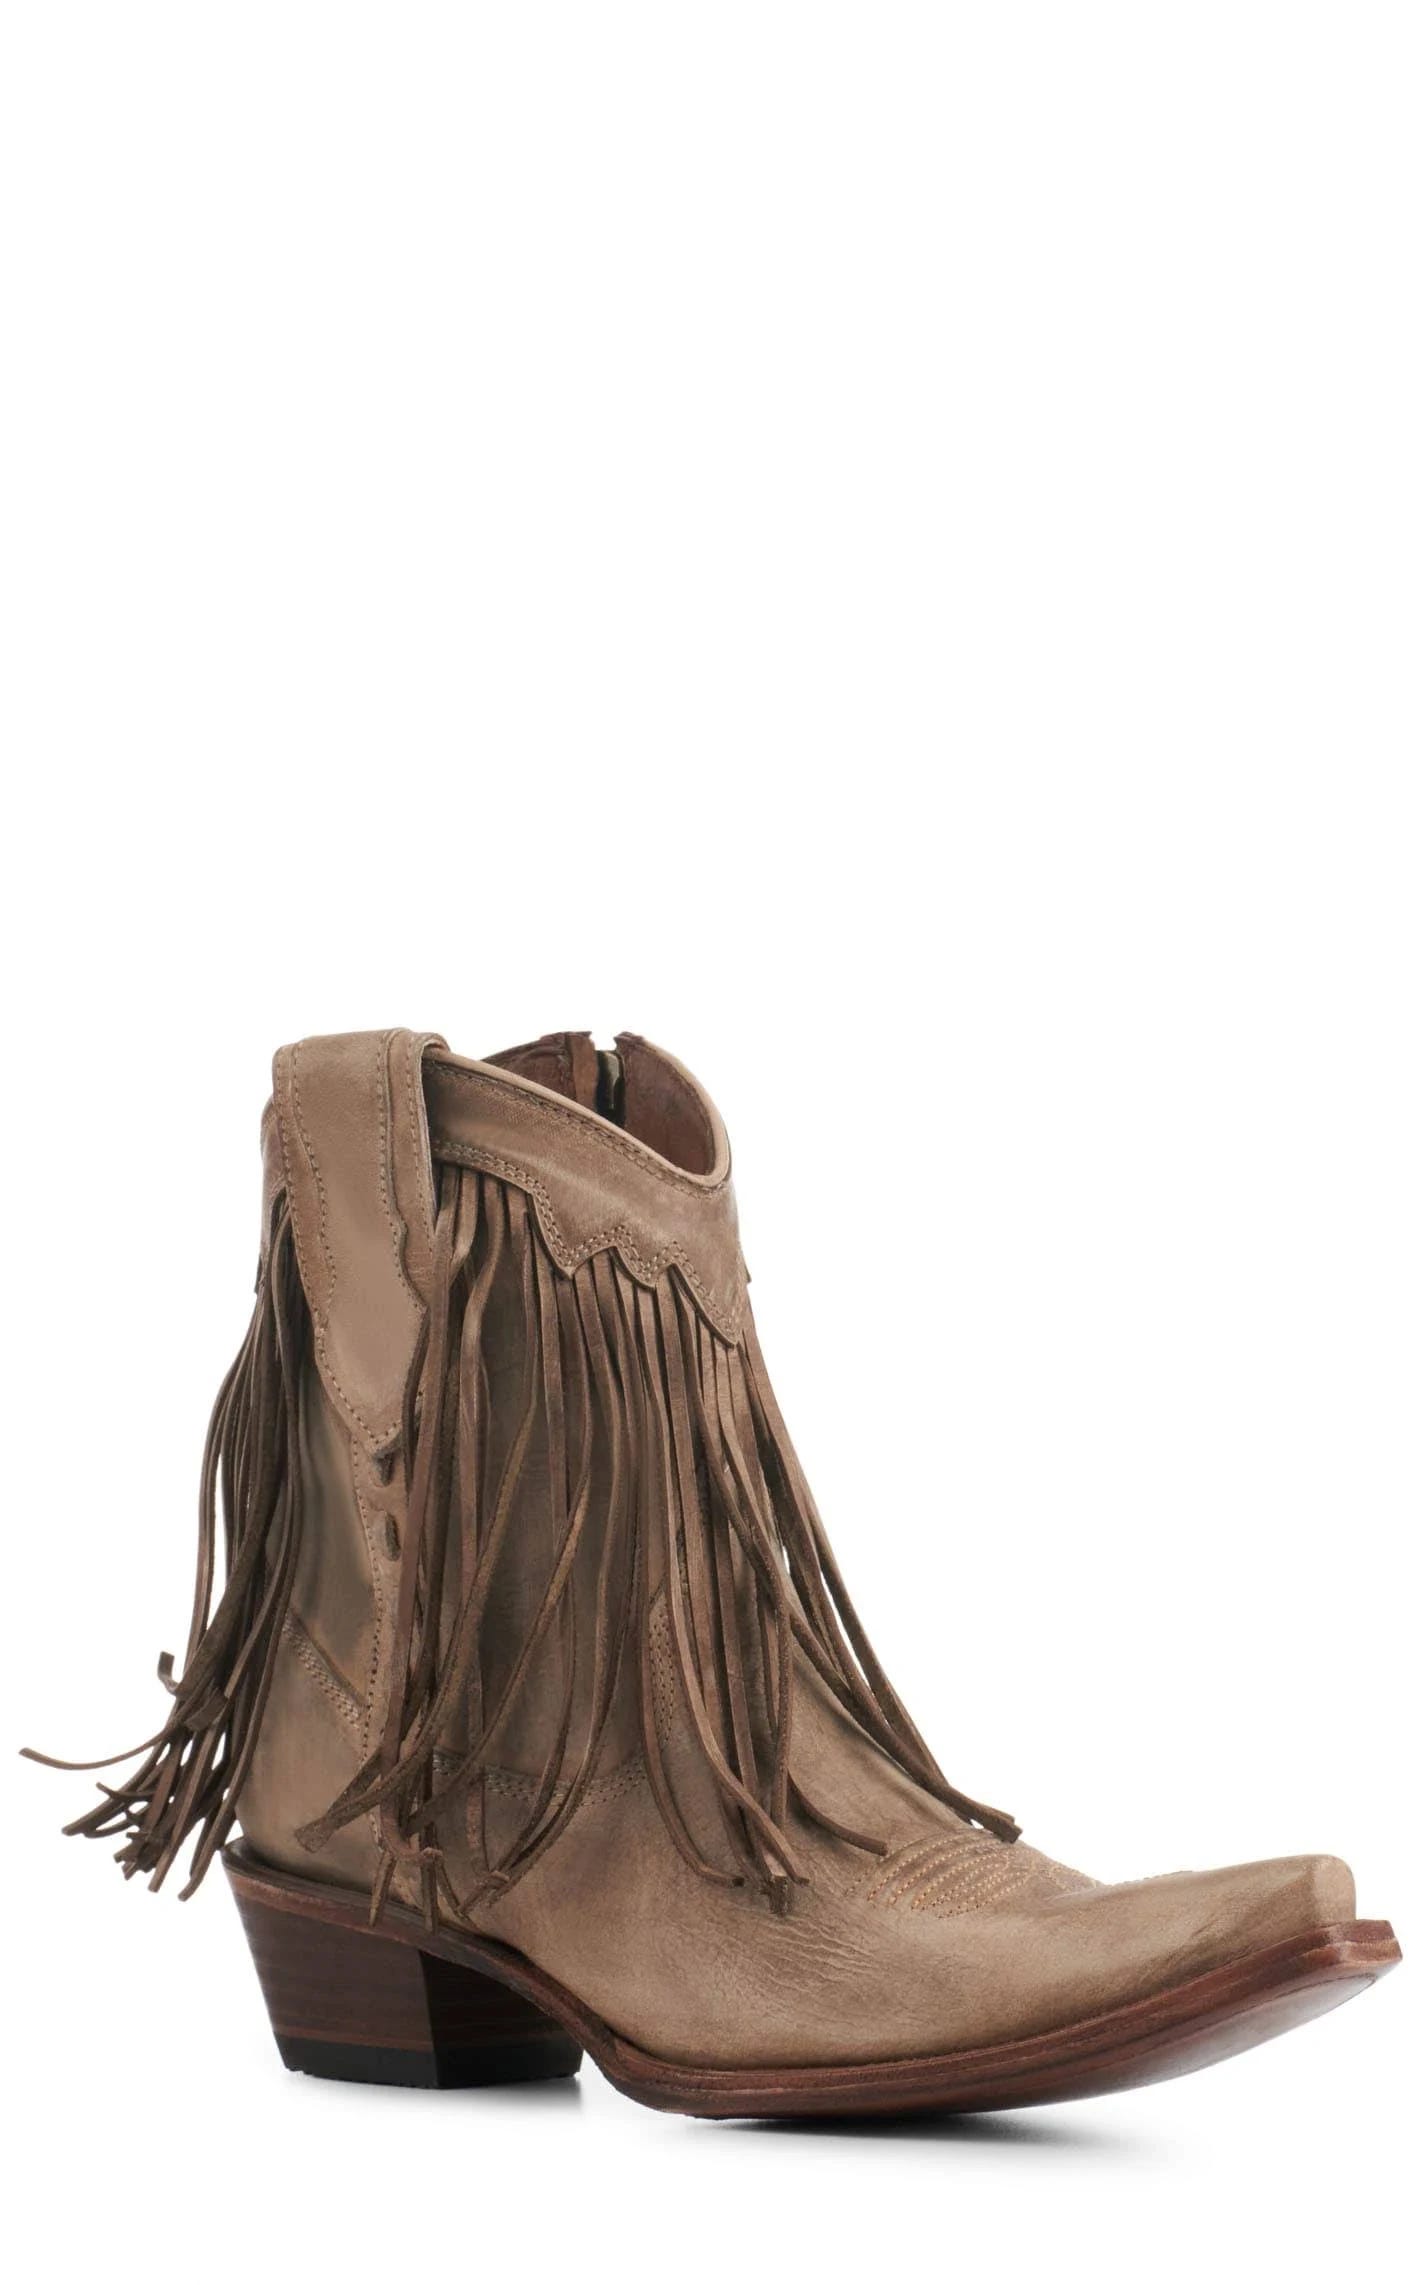 Fringe Cowboy Boots by Circle G - Stylish Snip Toe Ankle Boots | Image